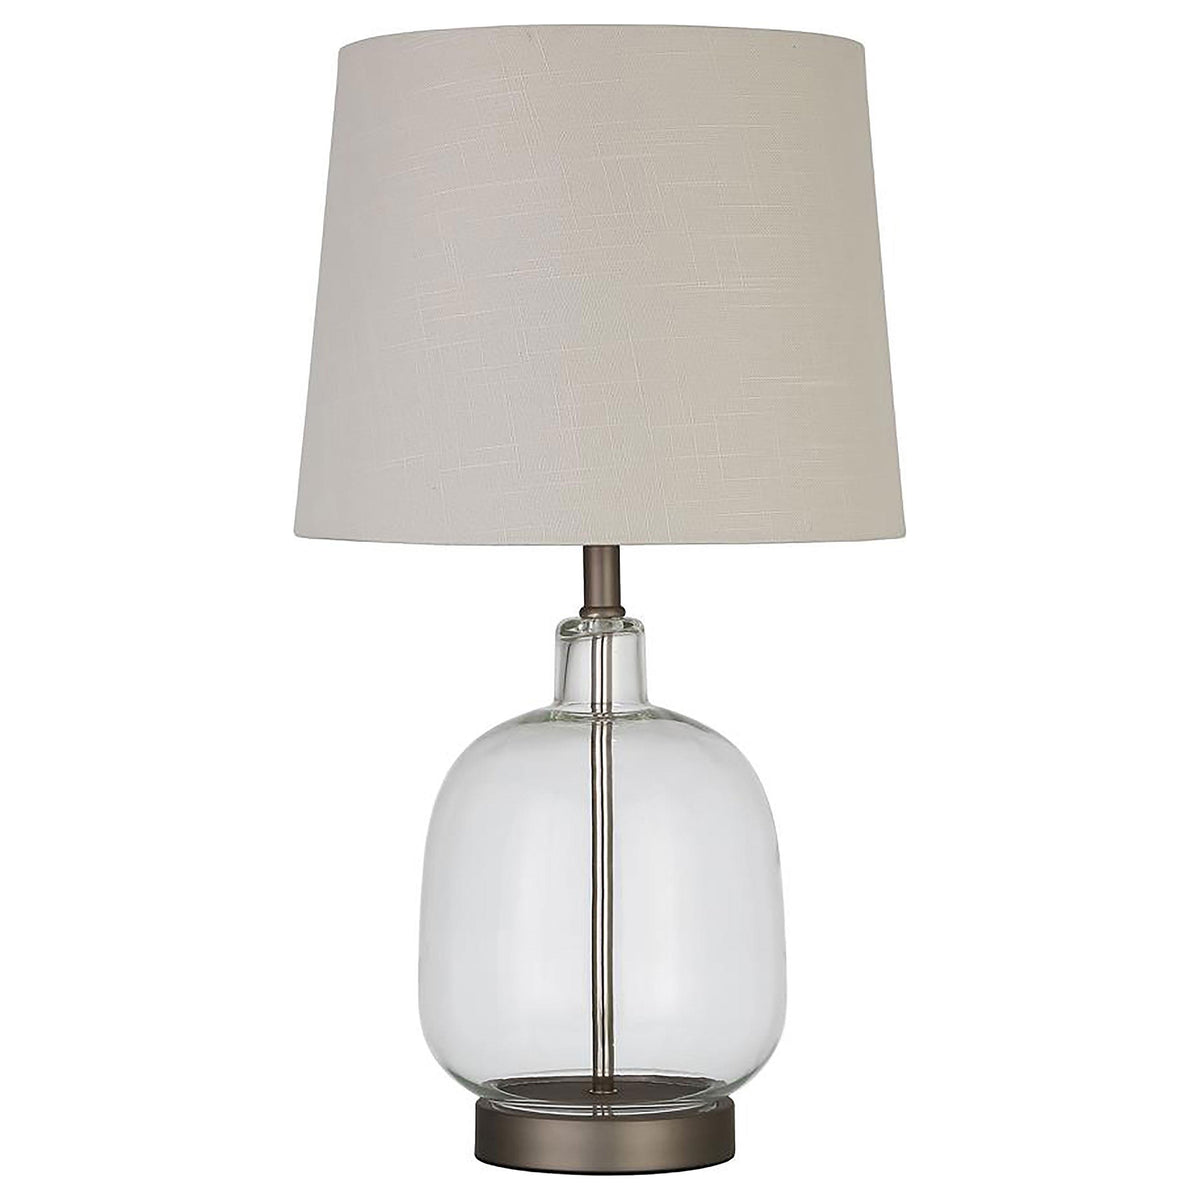 Costner Empire Table Lamp Beige and Clear Costner Empire Table Lamp Beige and Clear Half Price Furniture